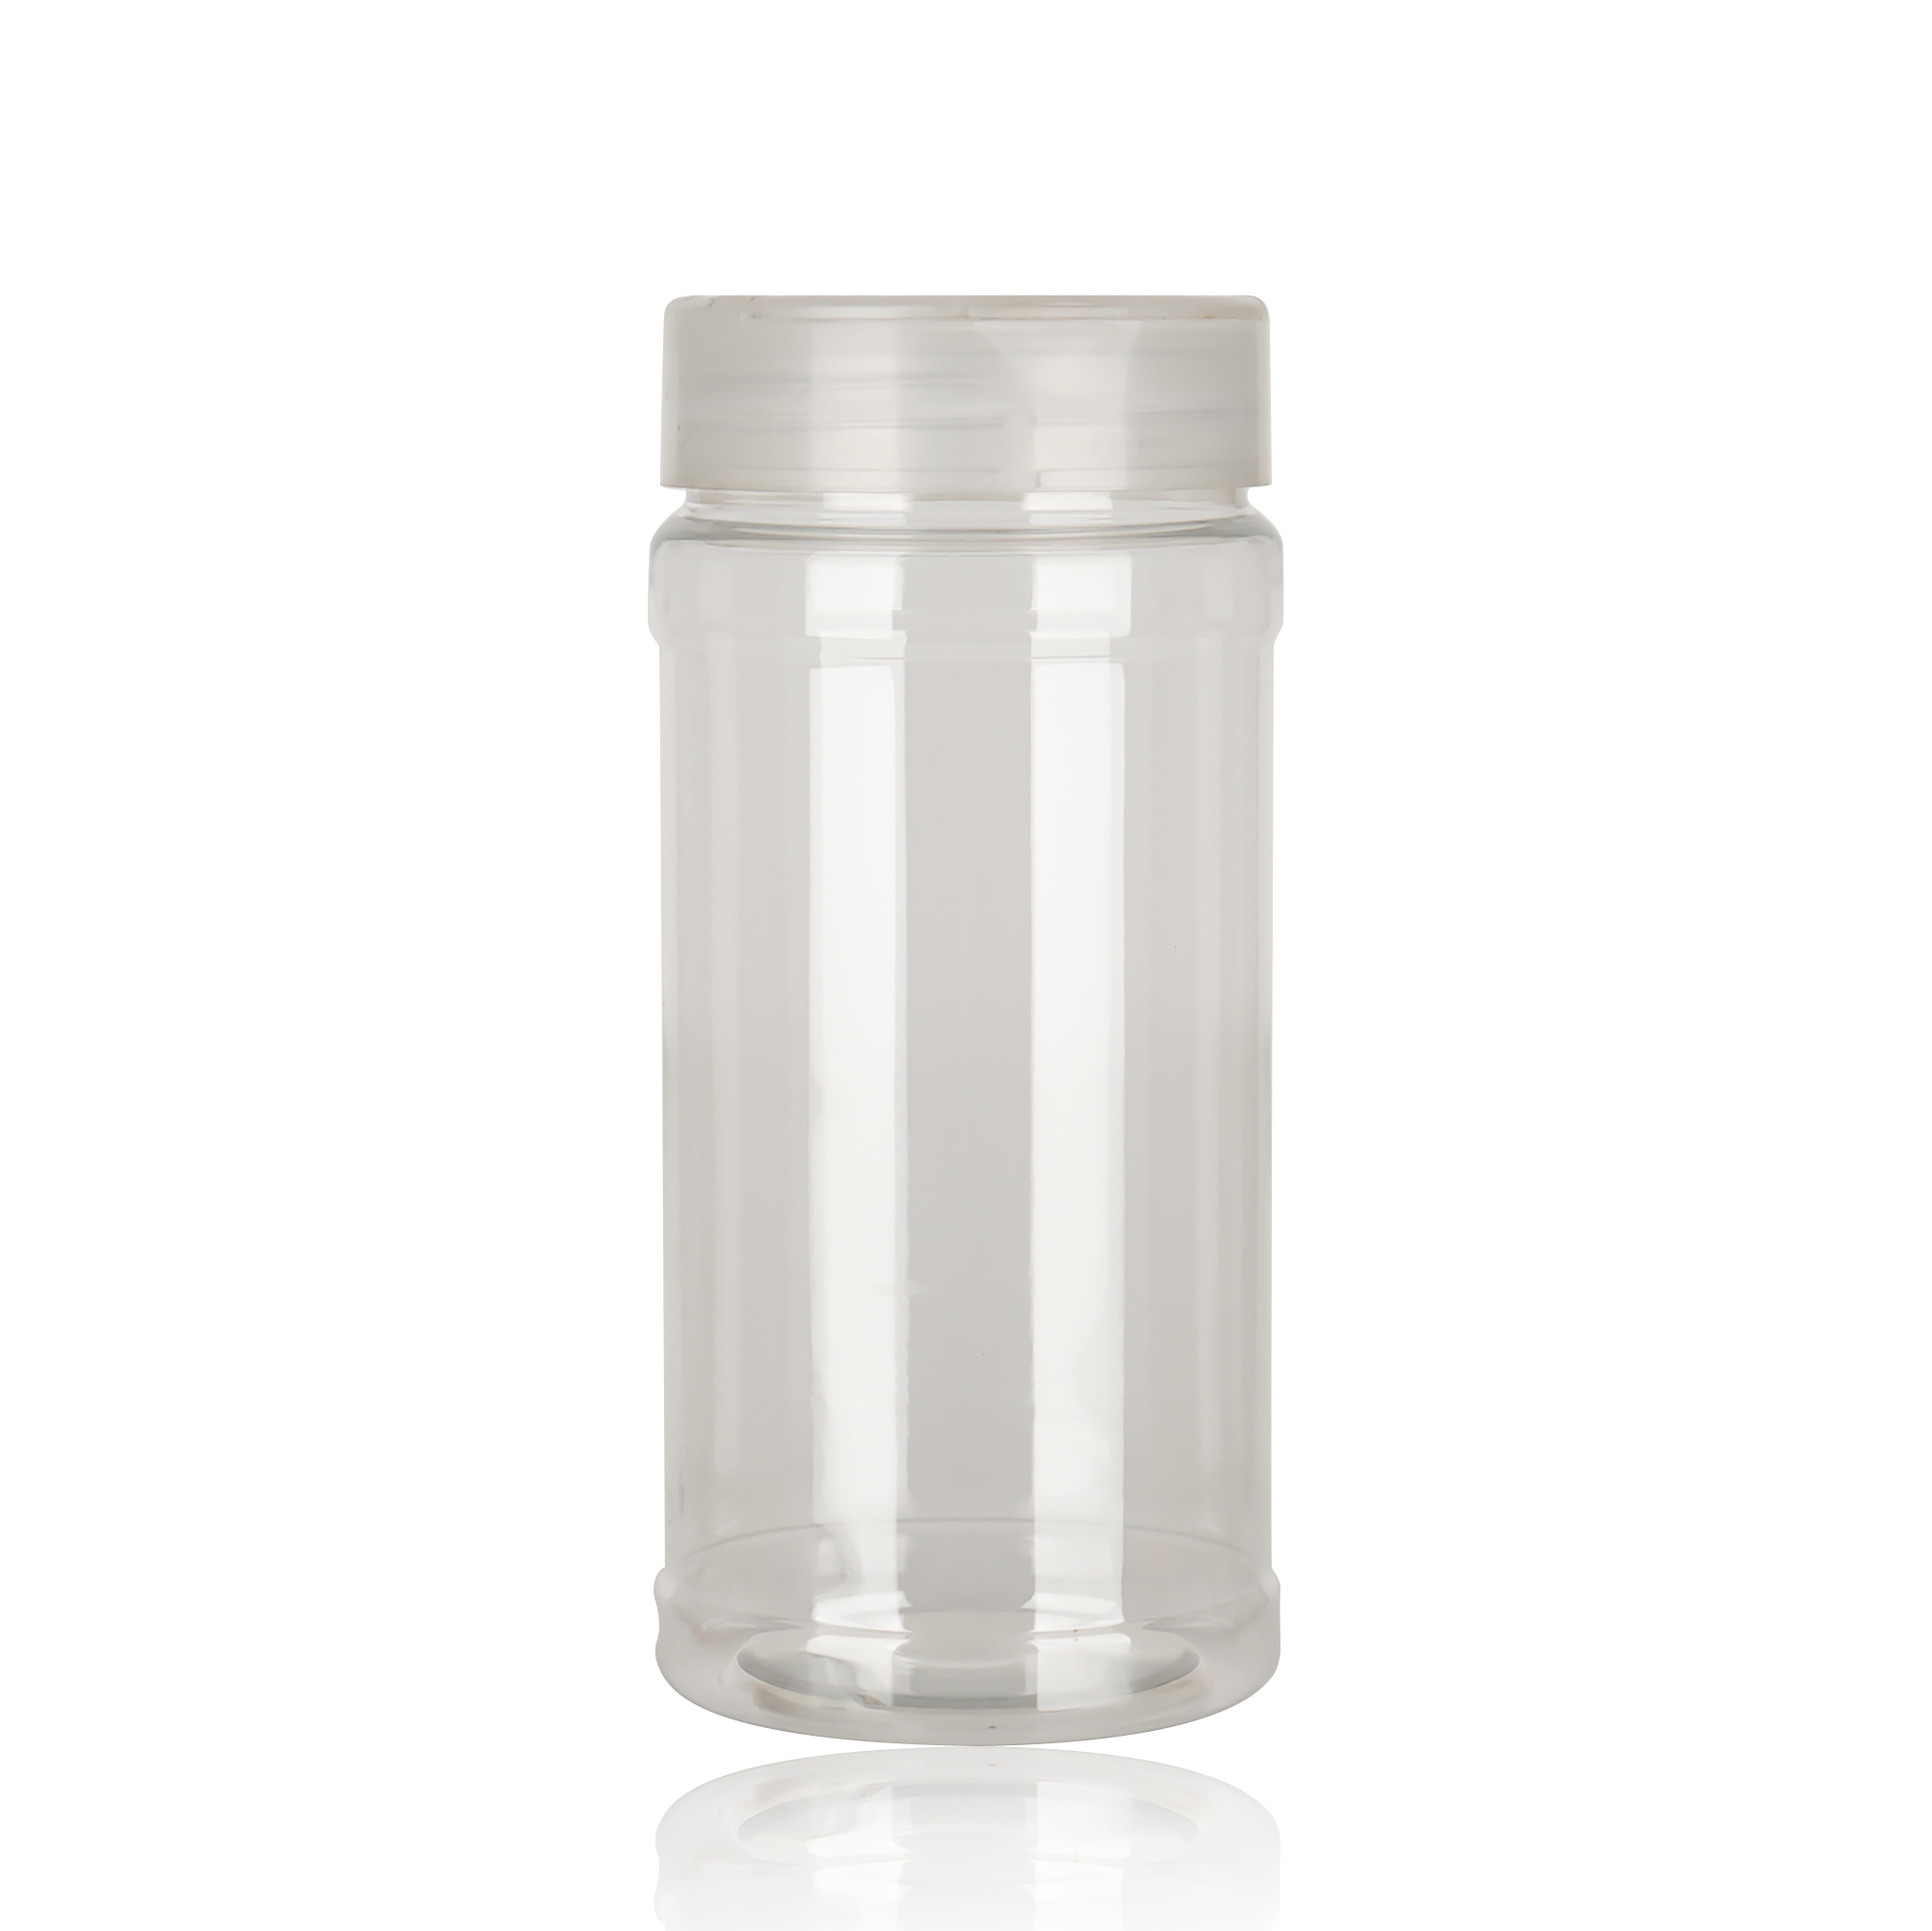 BPA Free PET Plastic Spice Jars Bottles Containers for Storing Spice Herbs Powder Sifter Container Bottle